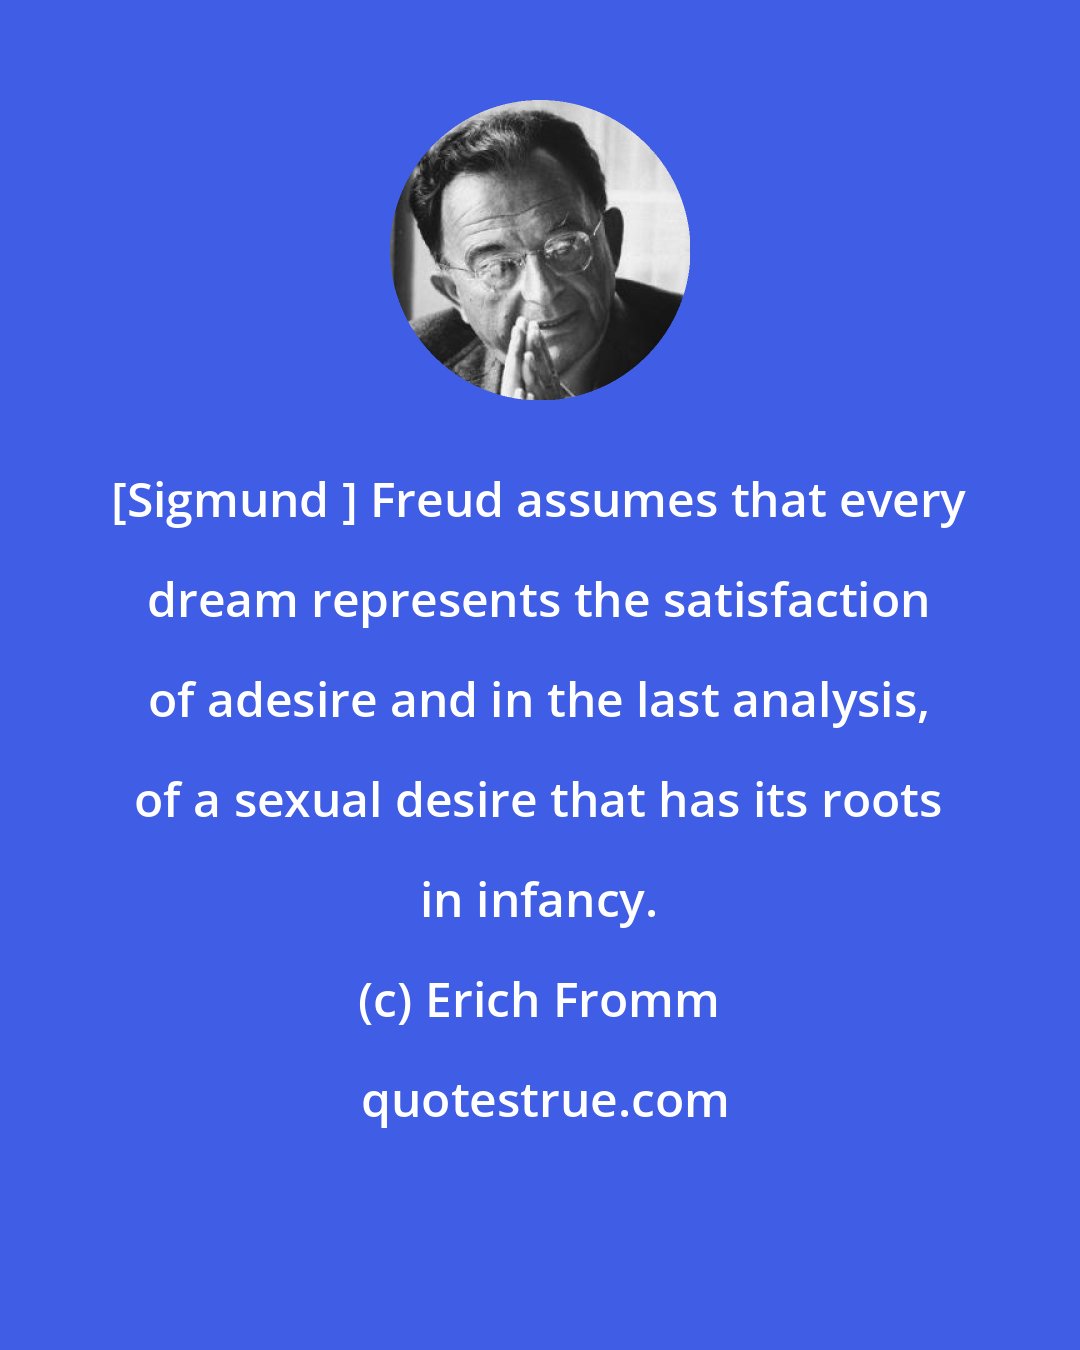 Erich Fromm: [Sigmund ] Freud assumes that every dream represents the satisfaction of adesire and in the last analysis, of a sexual desire that has its roots in infancy.